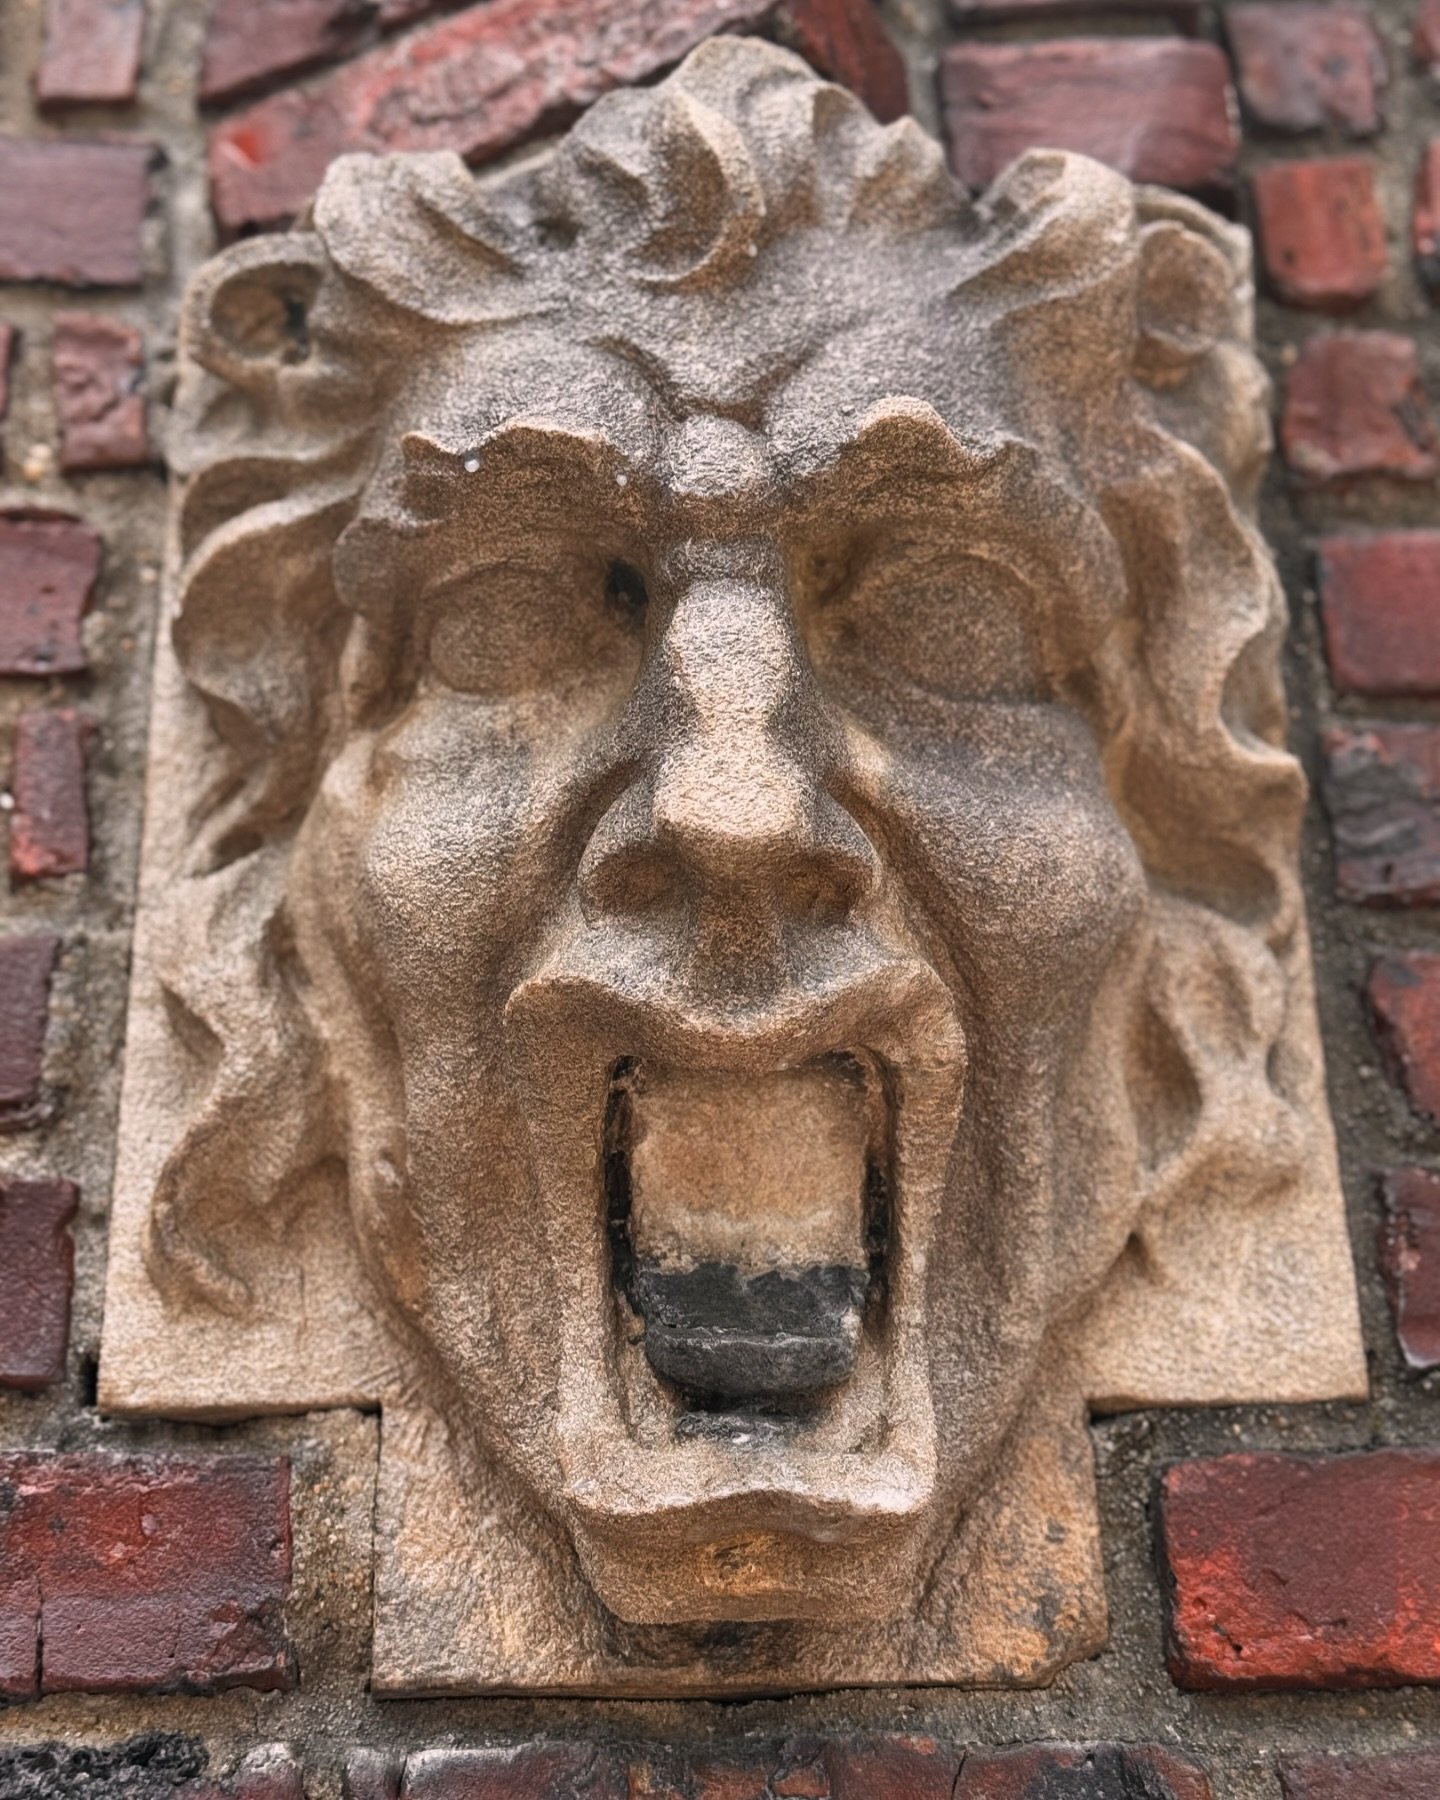 Have you ever noticed this face glaring at you in downtown Scarsdale? Do you know where it is?  Look closely and you&rsquo;ll find a pair of them standing guard over a building&hellip;..

More fun and fascinating details about Scarsdale at tomorrow n